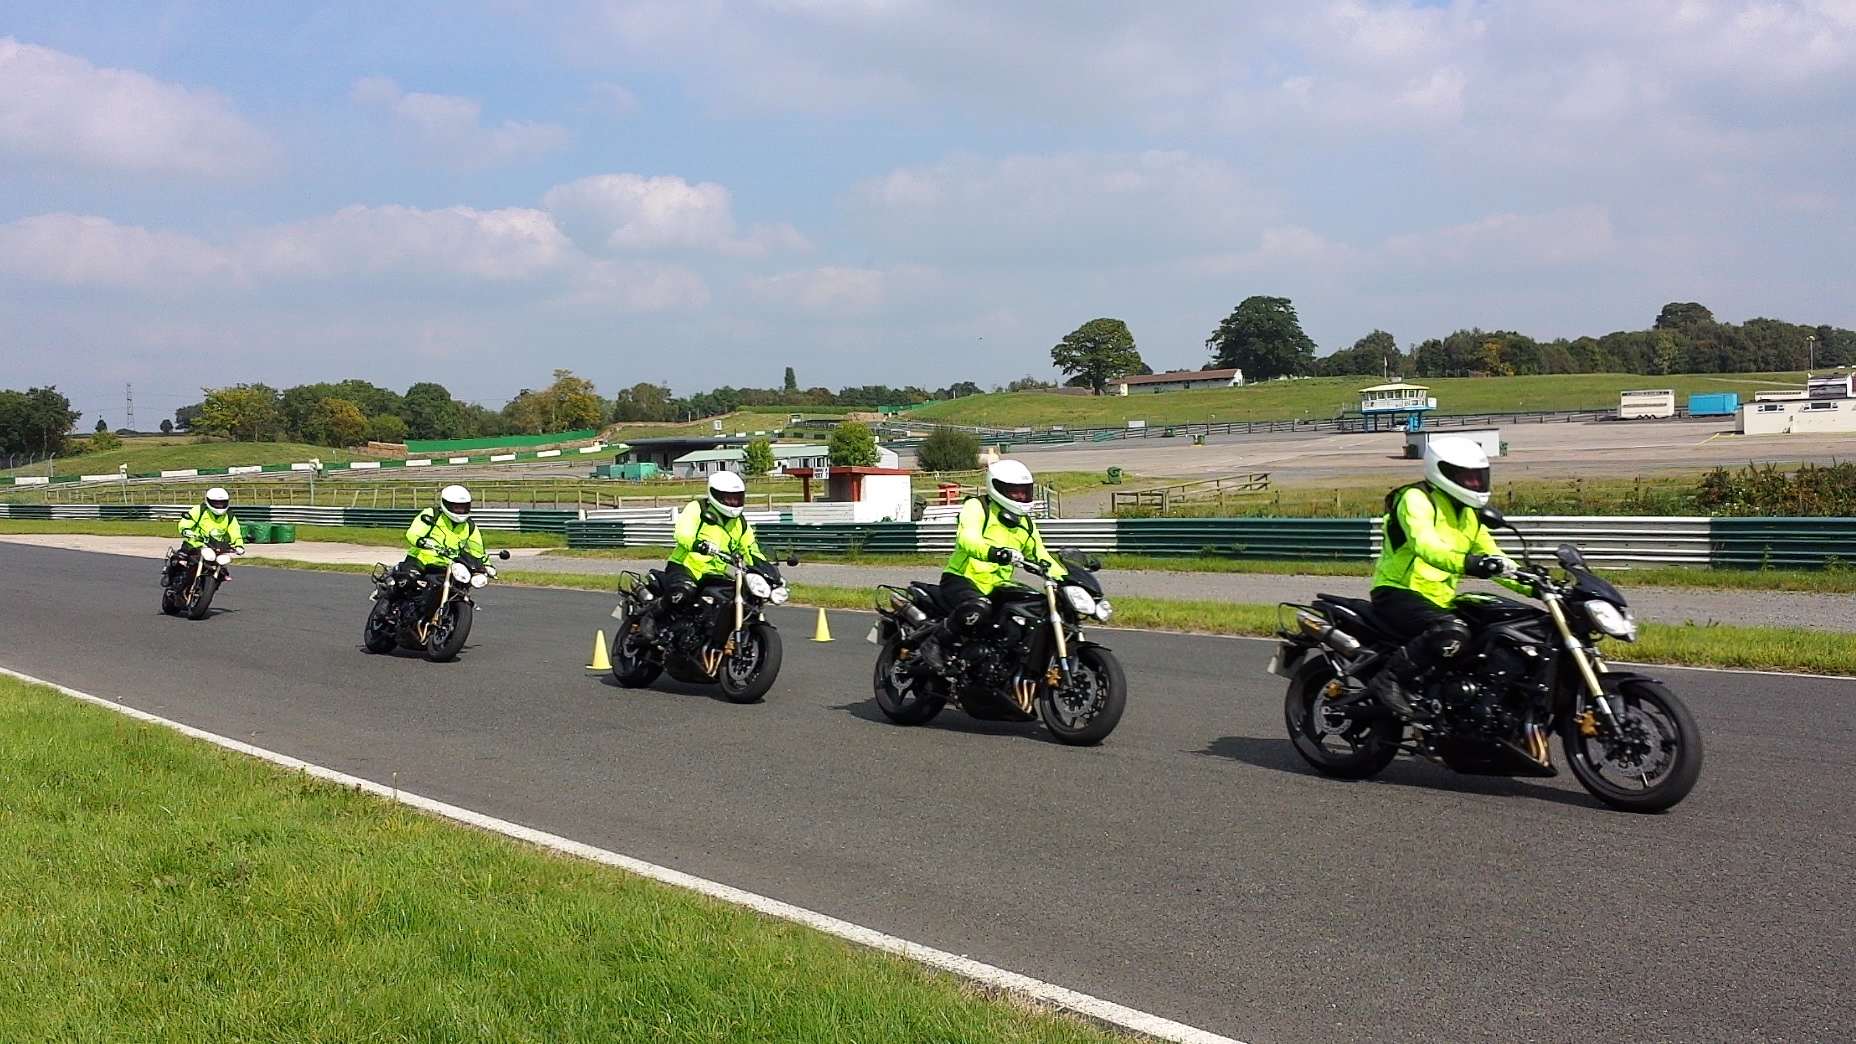 Motorcycle test in Leicester, Hinckley, Derby, Nottingham, Birmingham, St Albans, Lincoln